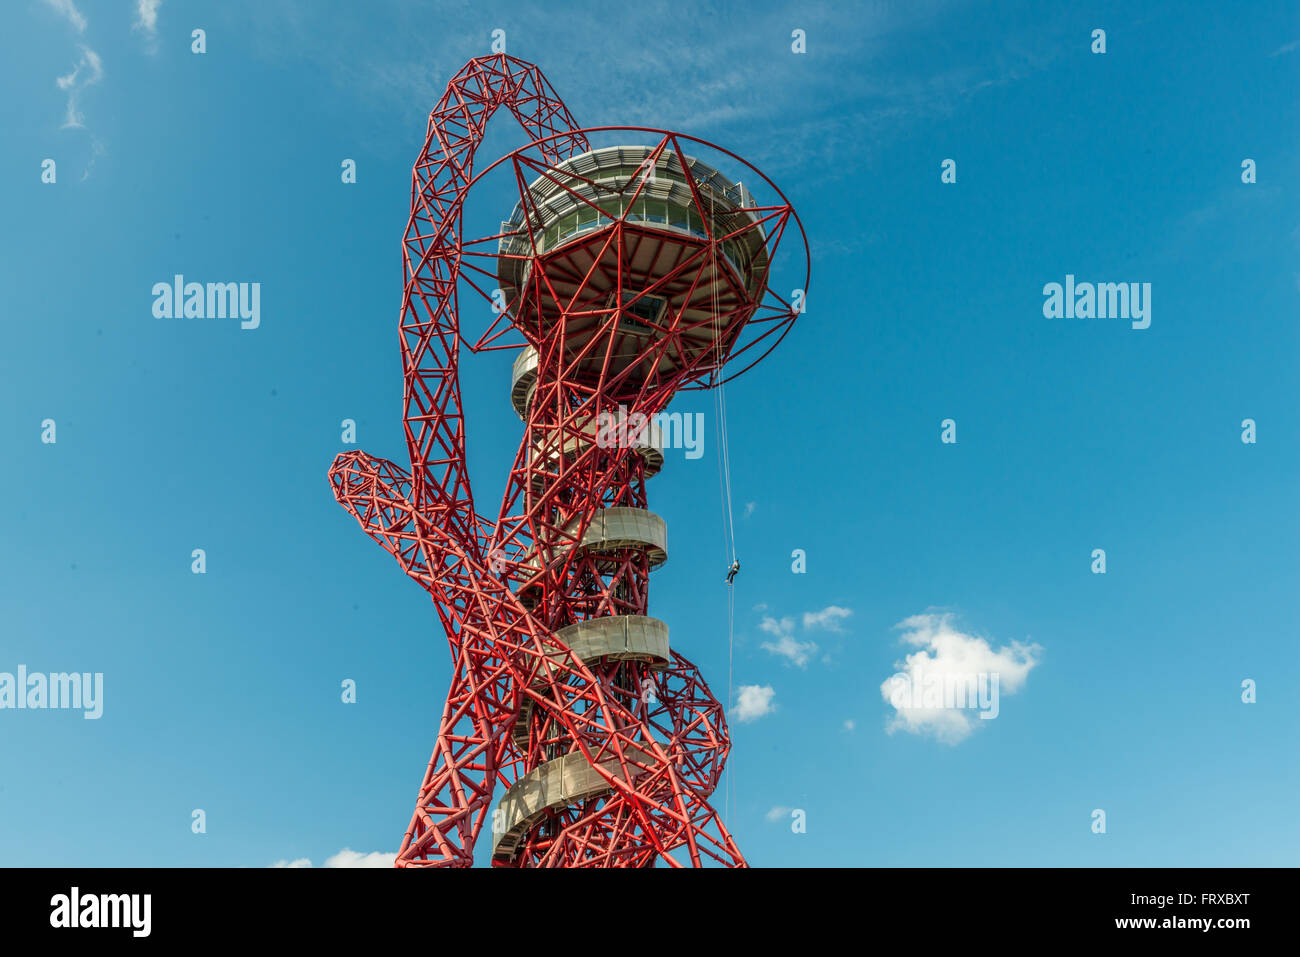 London, United Kingdom - August 22, 2015:Abseiling experience in ArcelorMittal Orbit, Queen Elizabeth Olympic Park. Stock Photo